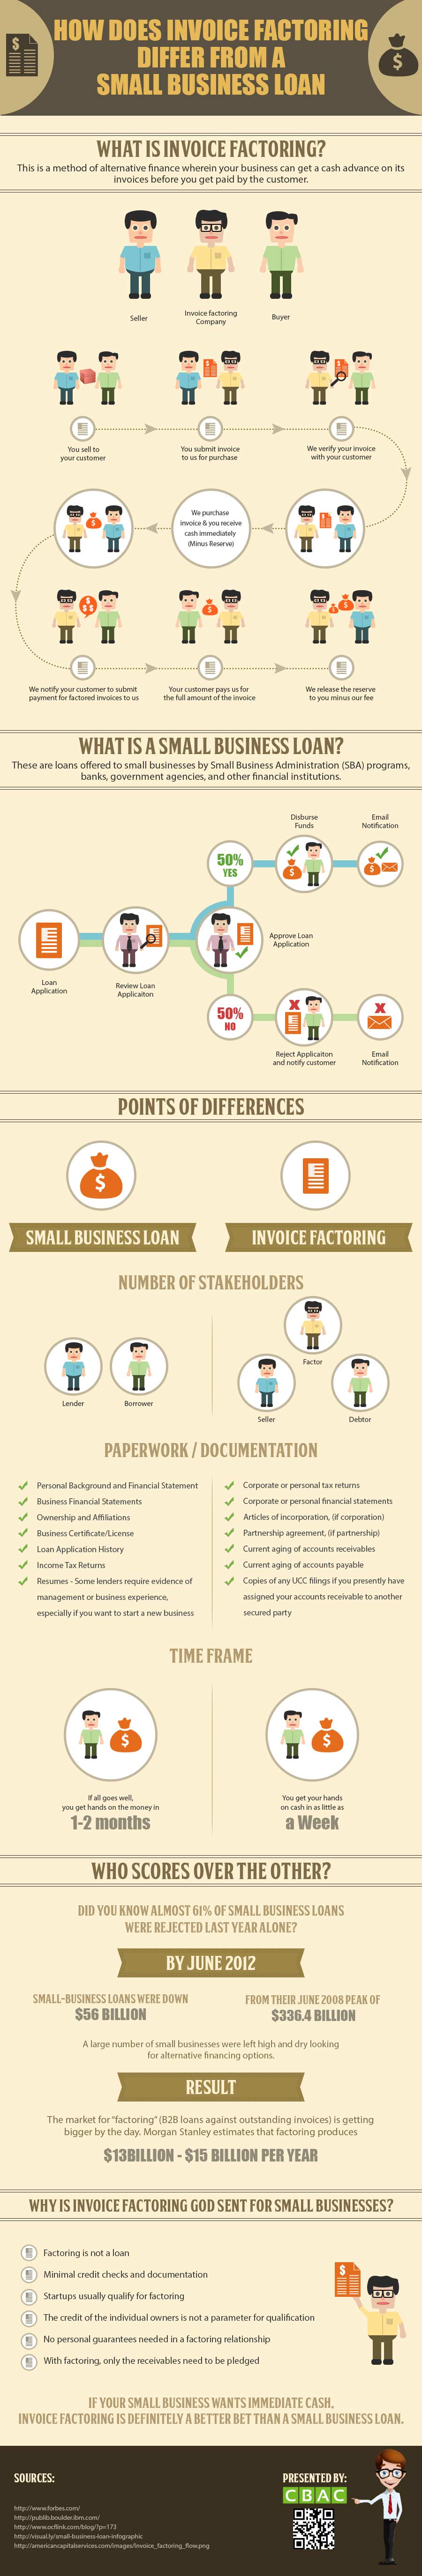 How Does Invoice Factoring Differ From a Small Business Loan